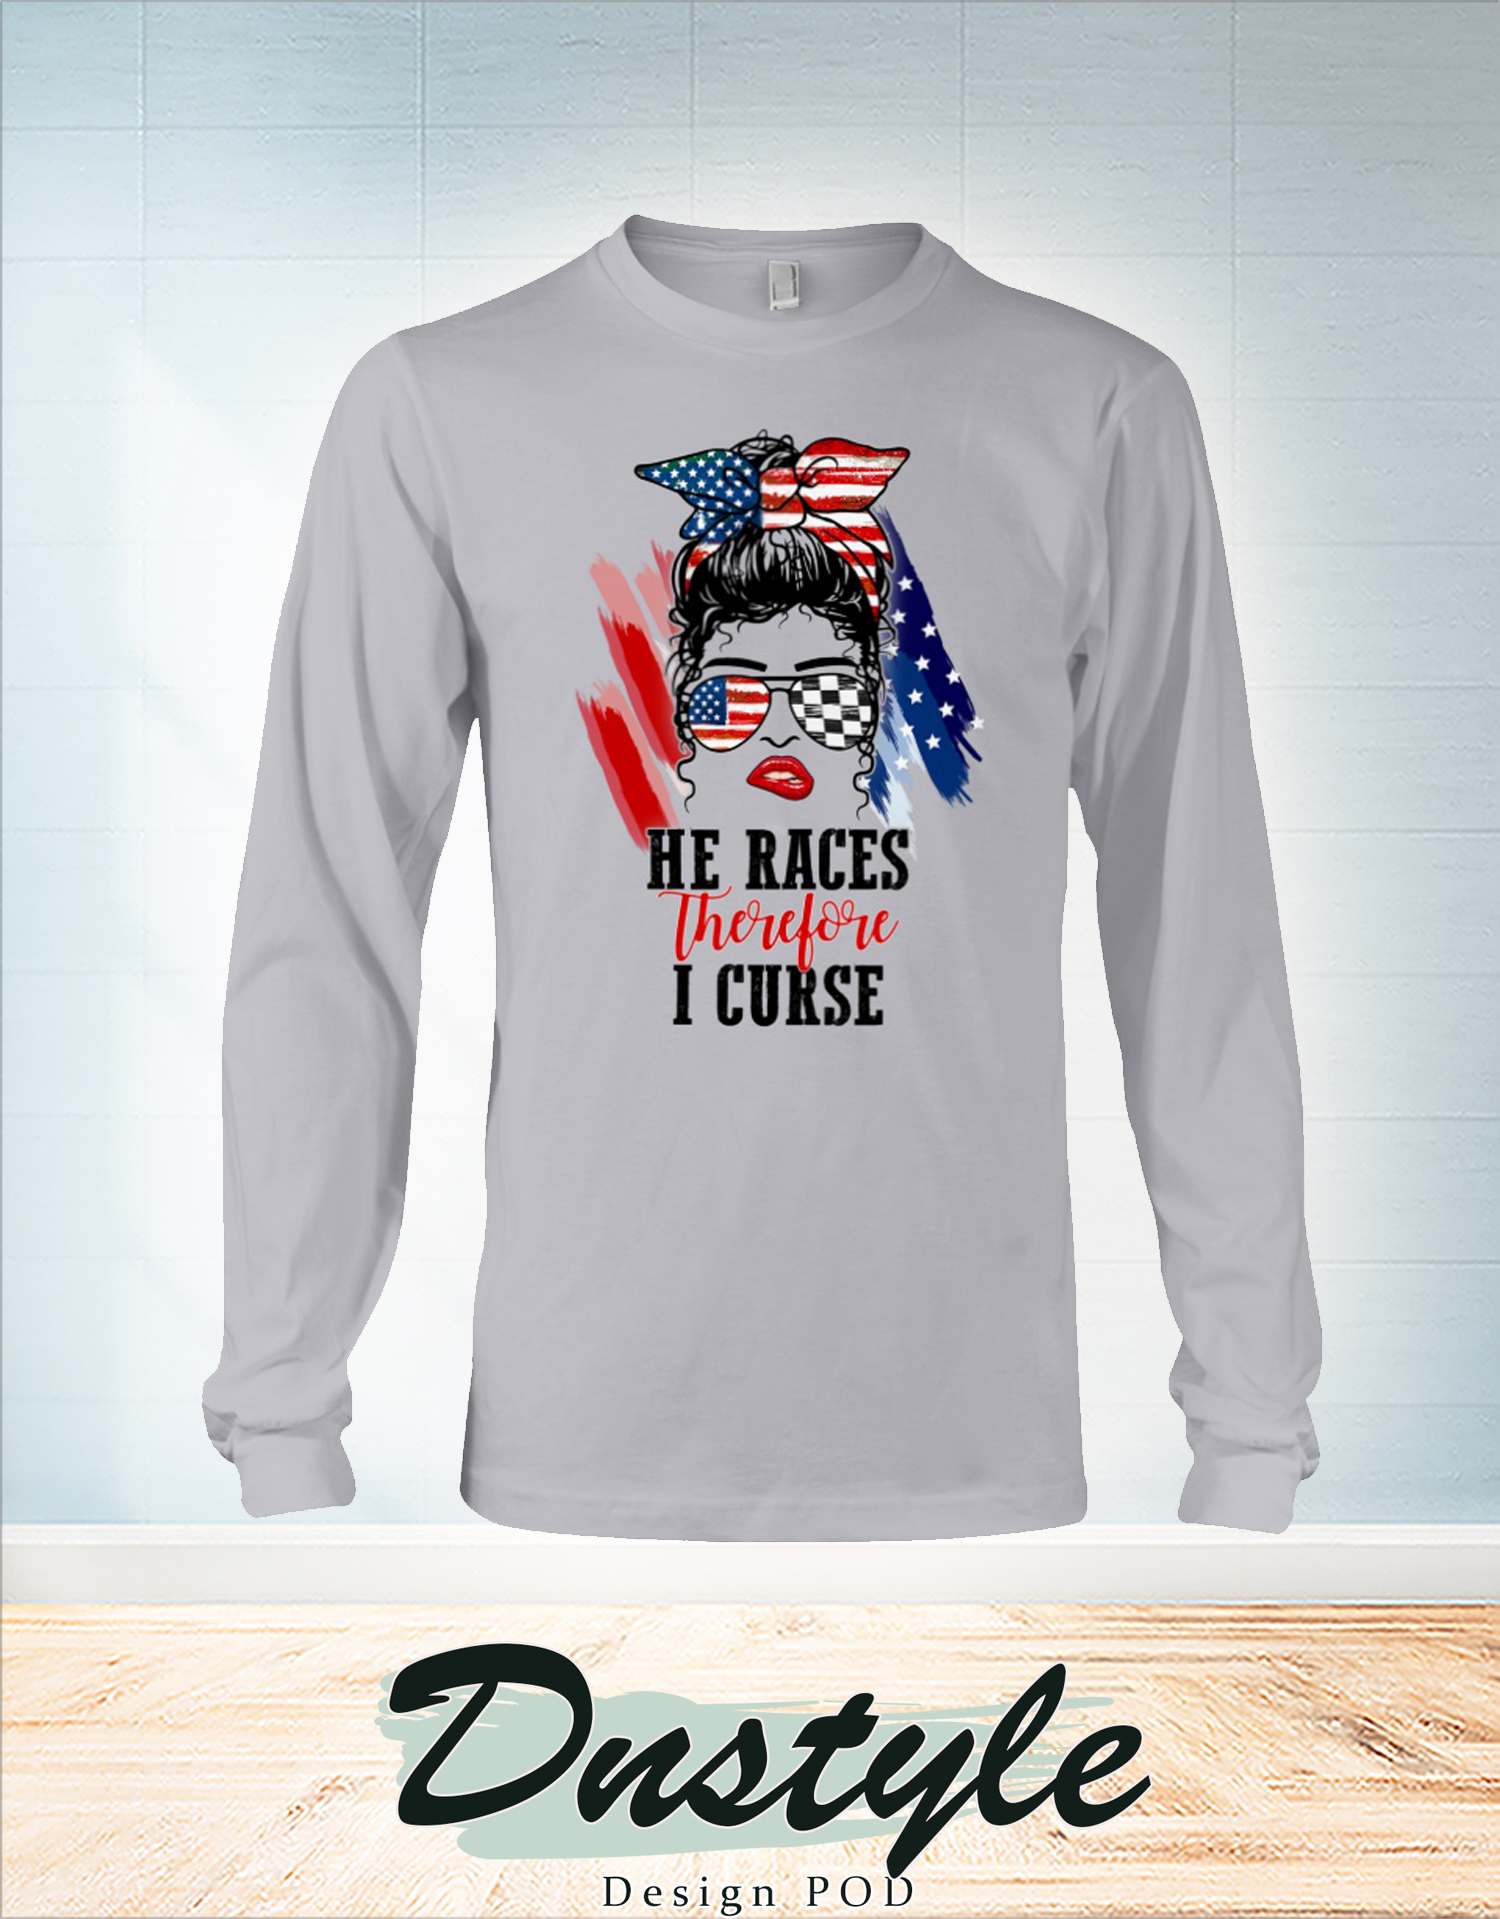 American flag glasses girl He races therefore I curse long sleeve